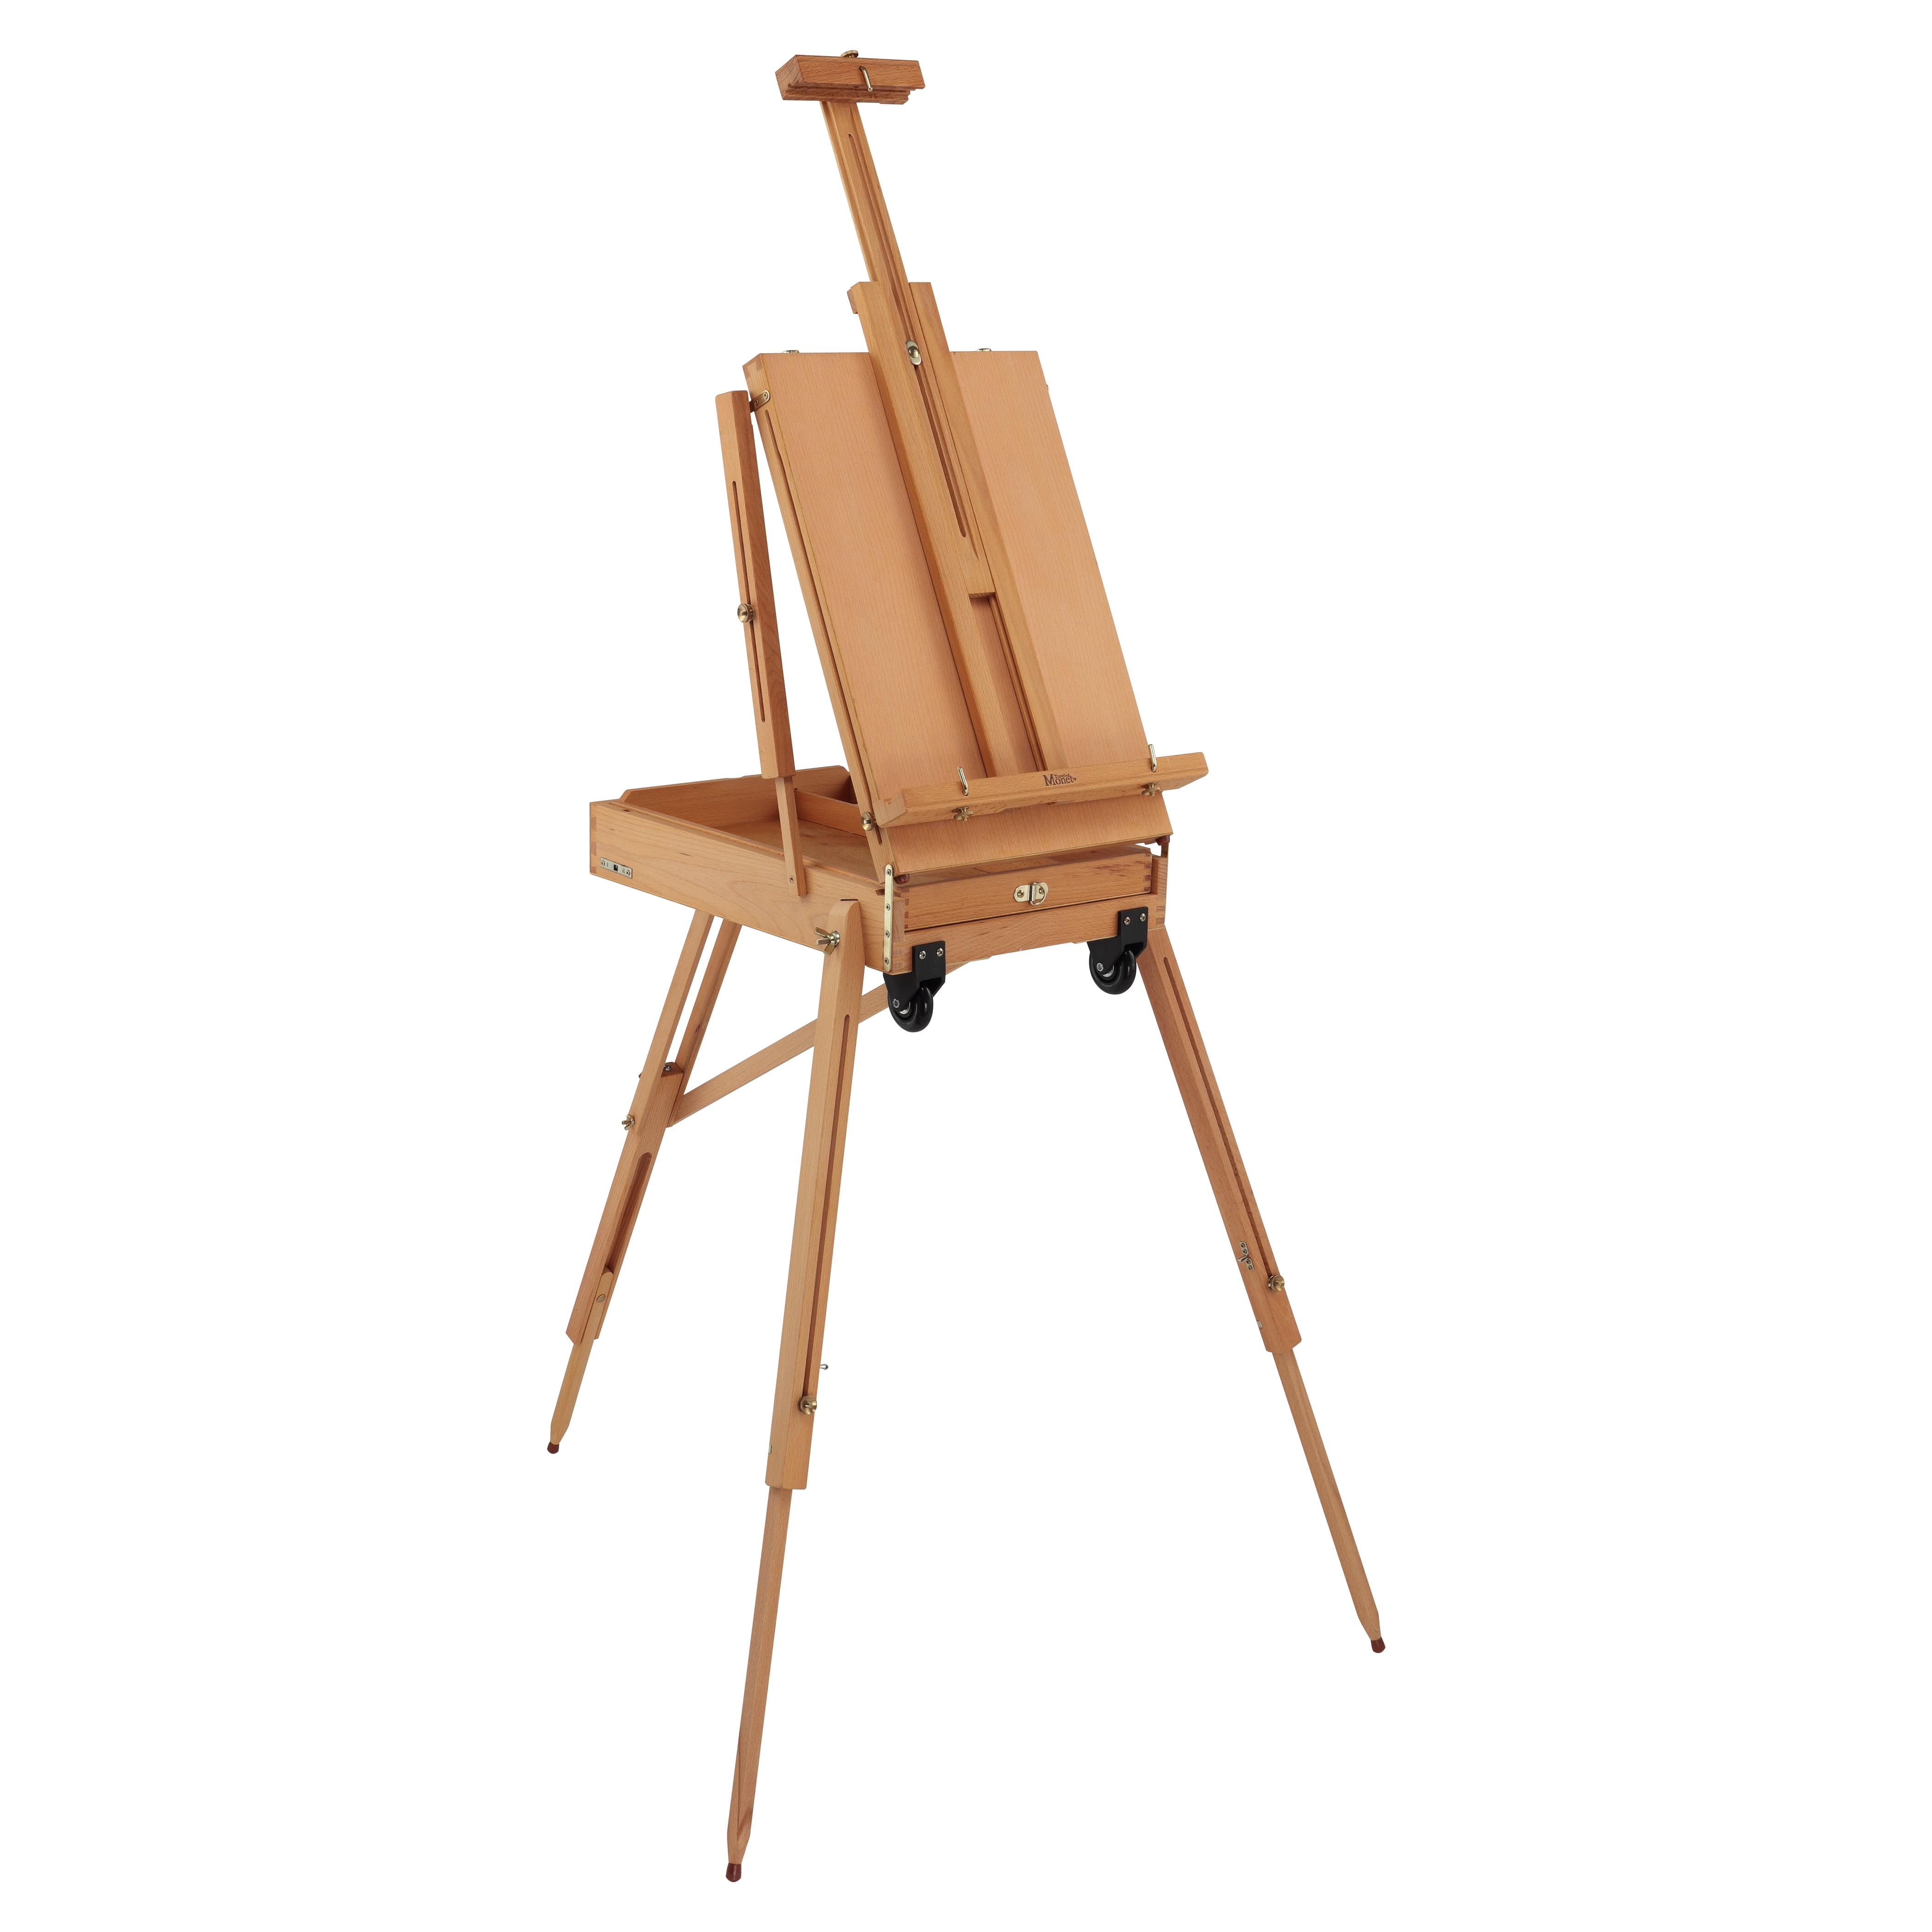 MEEDEN Art Easel, Painting Easel, Easel Stand for Painting, A-Frame Design  Solid Beech Wooden Easel, Holds Canvas up to 43, Walnut